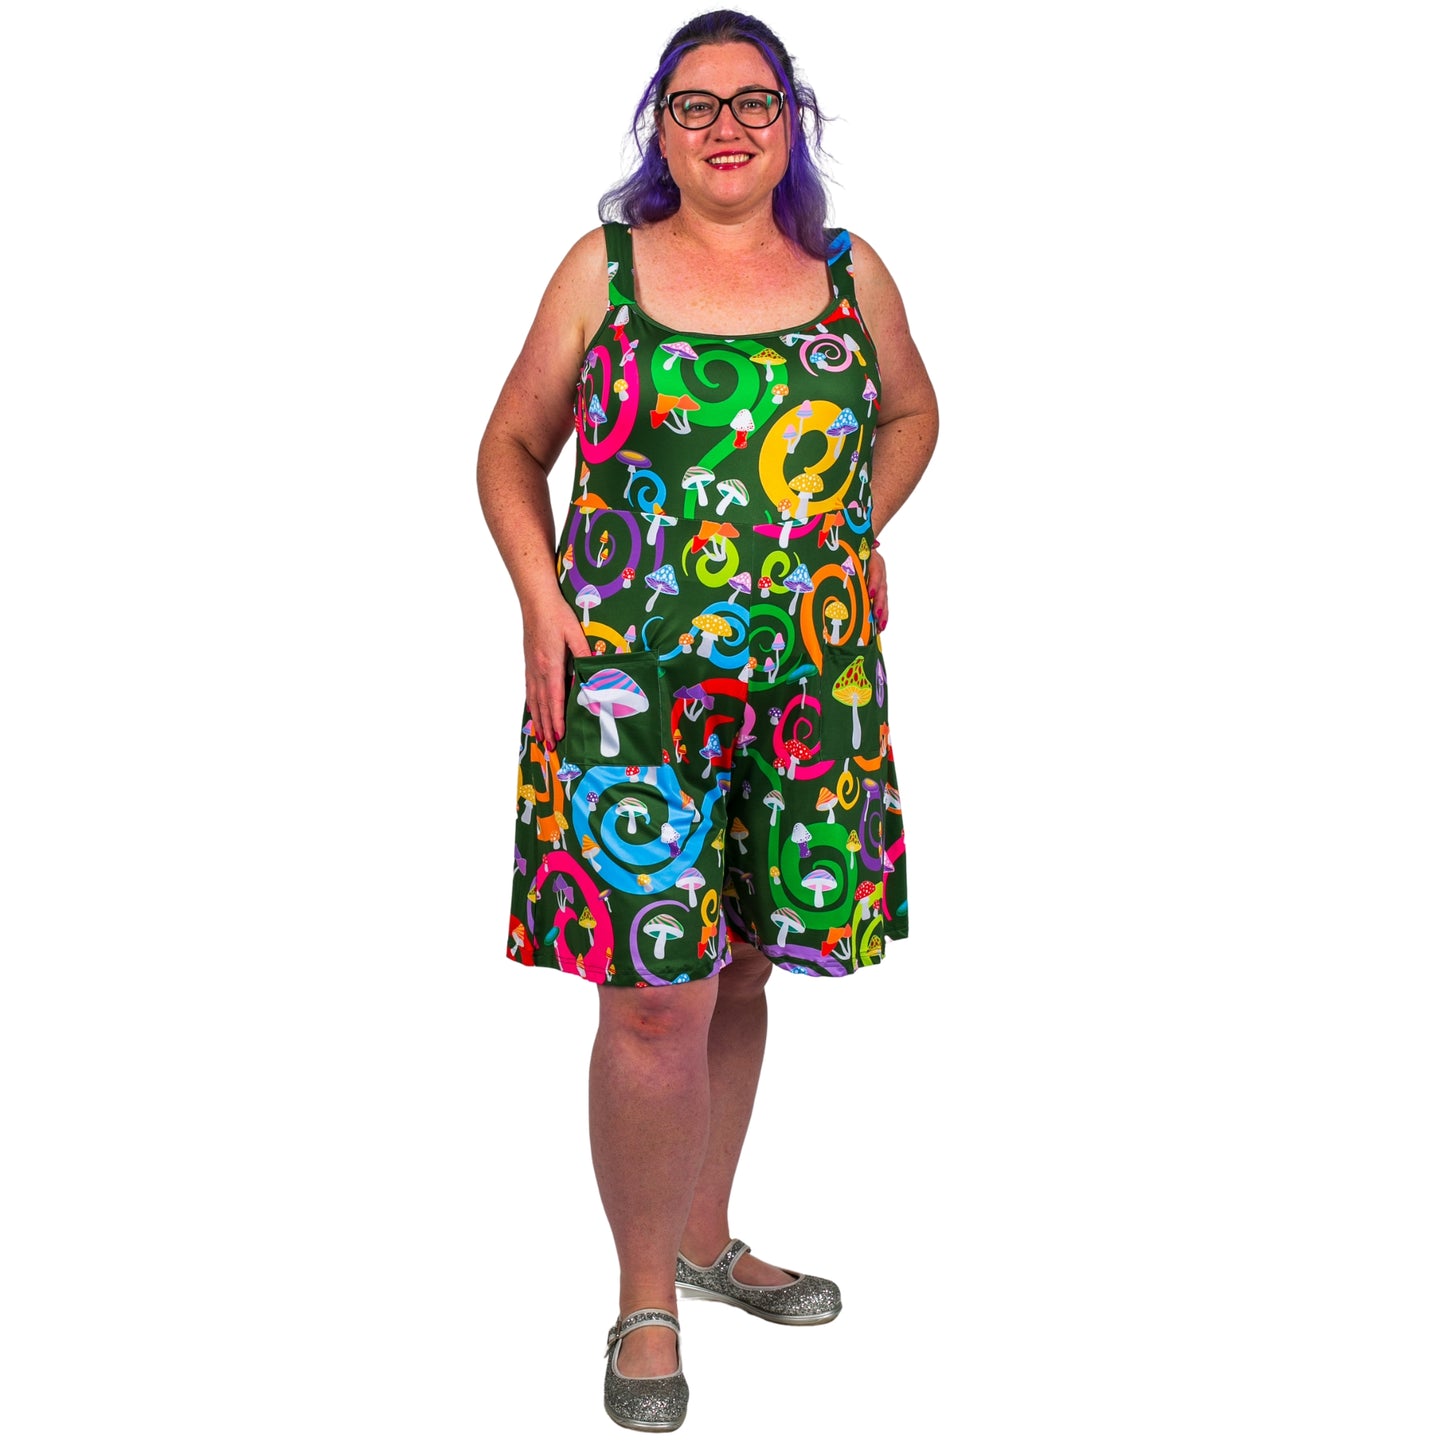 Toadstool Romper by RainbowsAndFairies.com.au (Mushroom - Psychedelic Swirl - Woodstock - Playsuit - Overalls - Shorts) - SKU: CL_ROMPR_TOADS_ORG - Pic-05